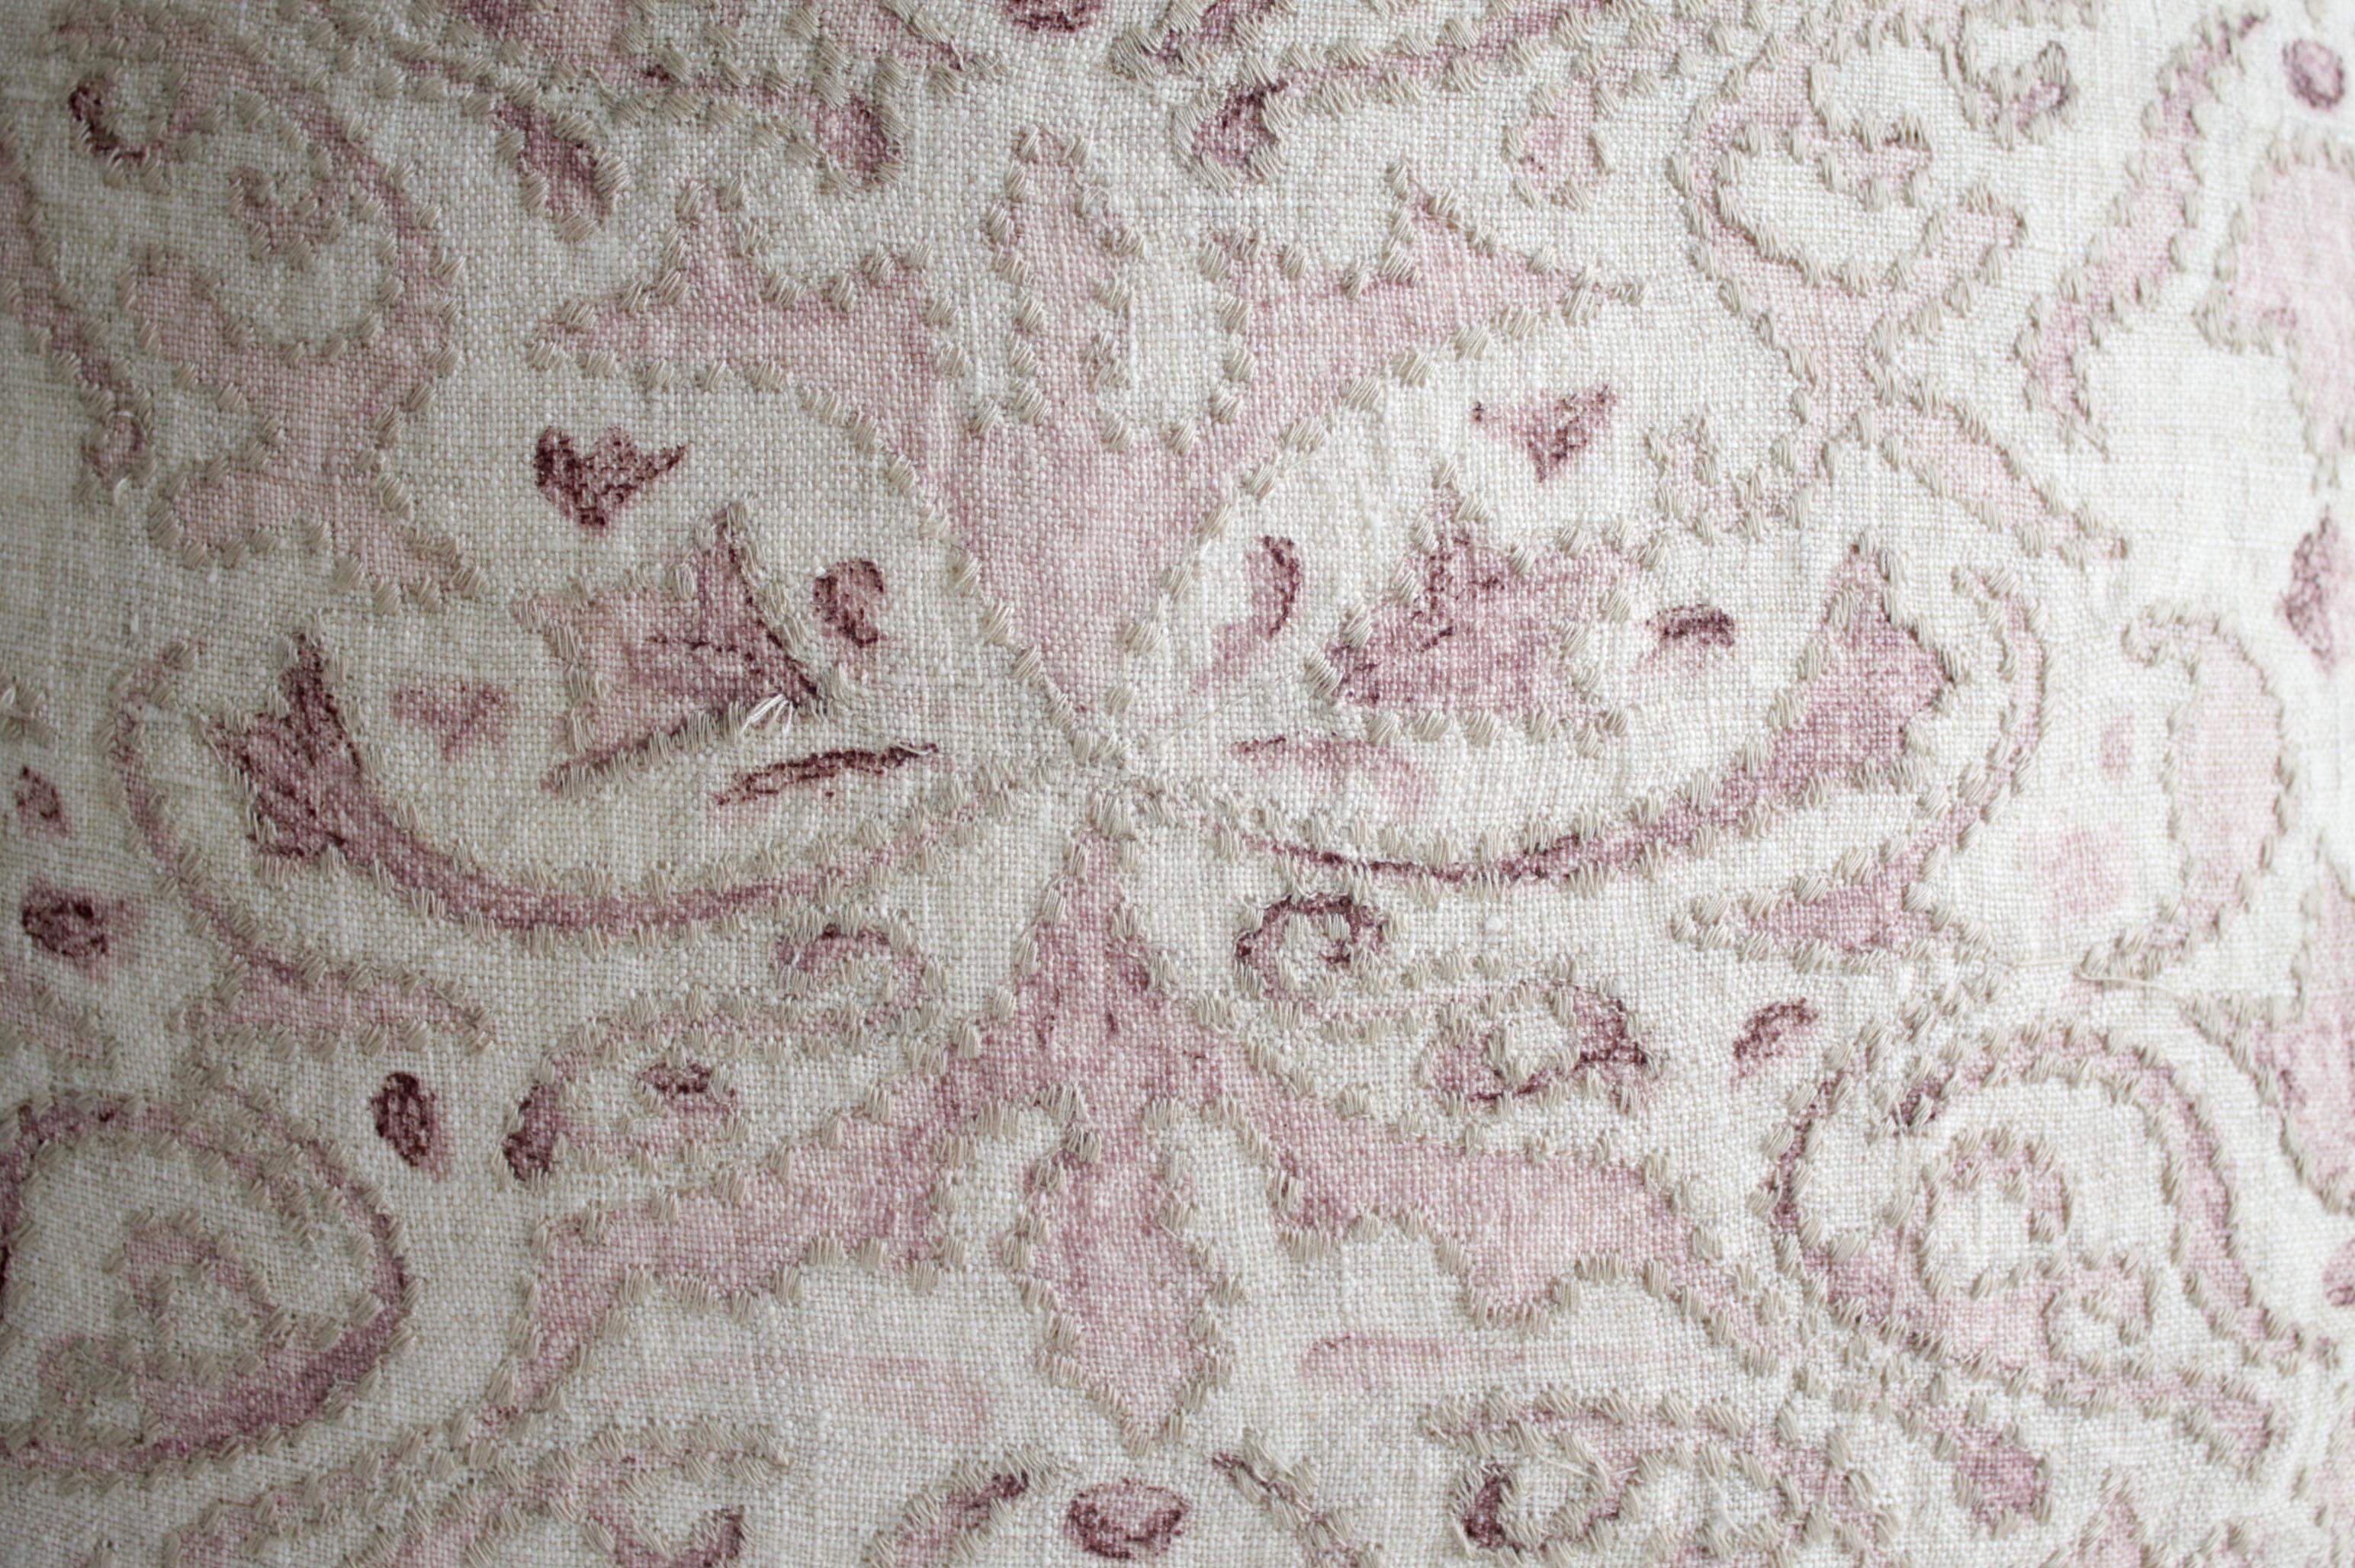 Embroidered Linen Pillow Cover in Blush Pinks and Natural Linen 1